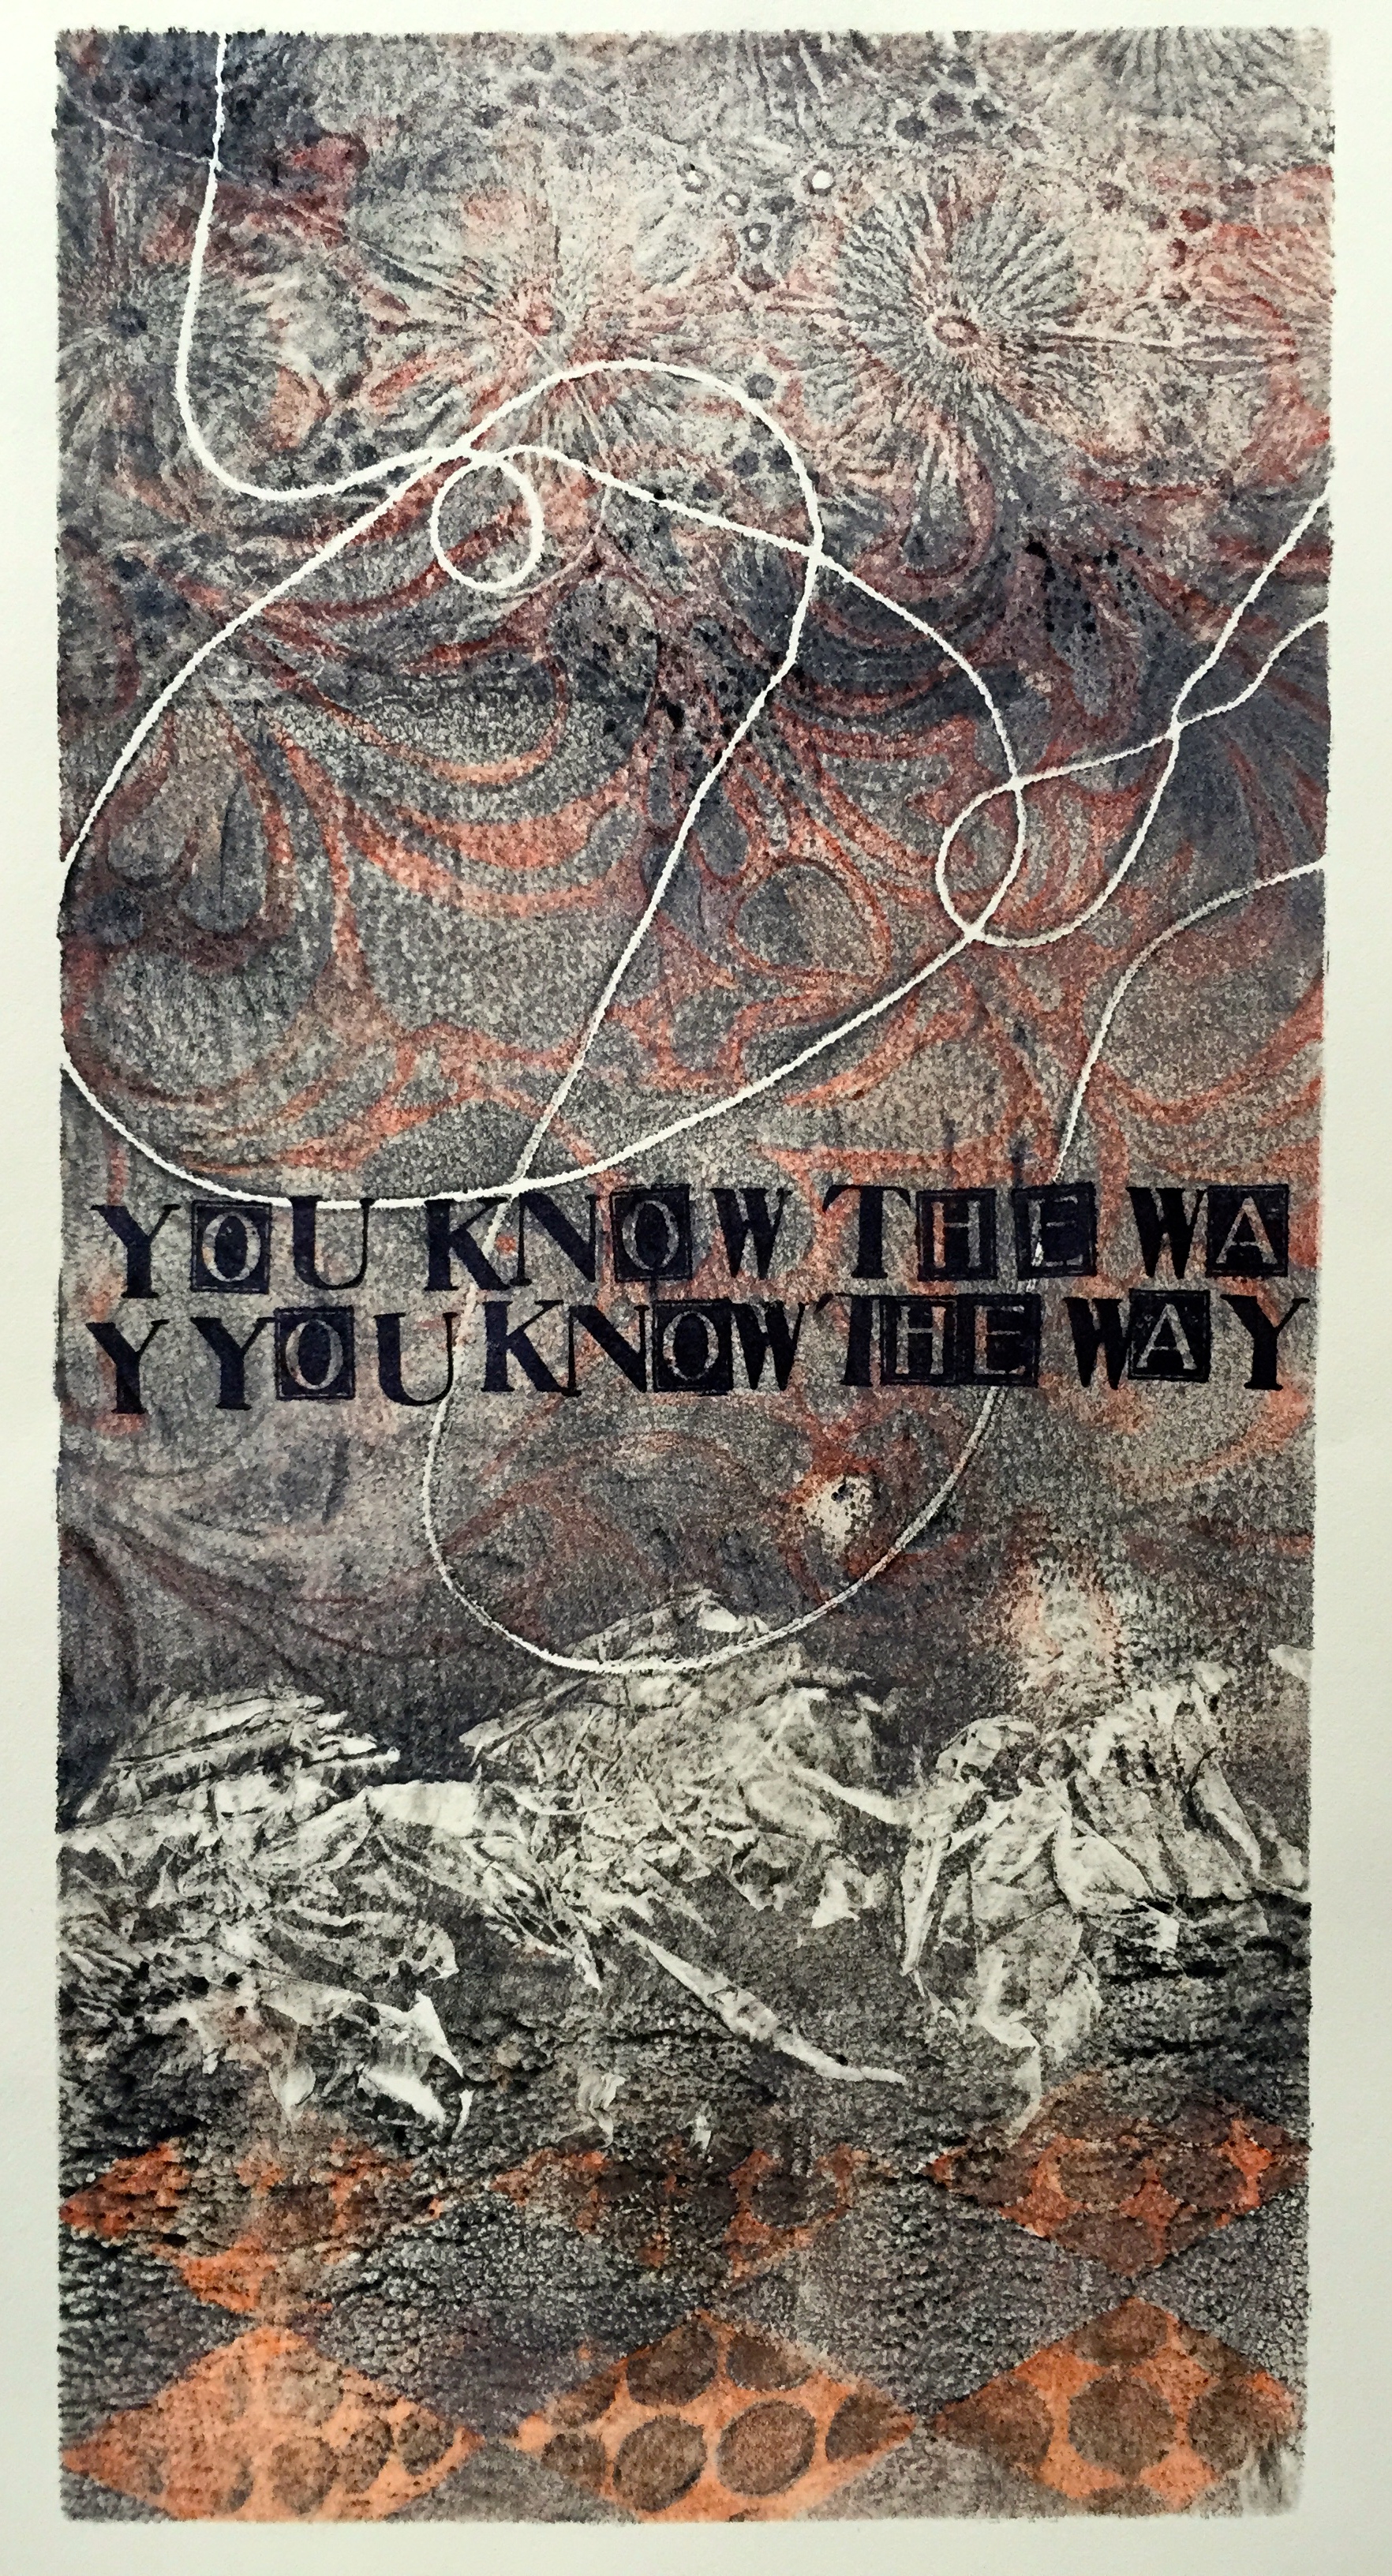   You Know&nbsp;   6 x 12 inches  mixed media  image: Susan Webster  stamped&nbsp;text: Stuart Kestenbaum  2015 